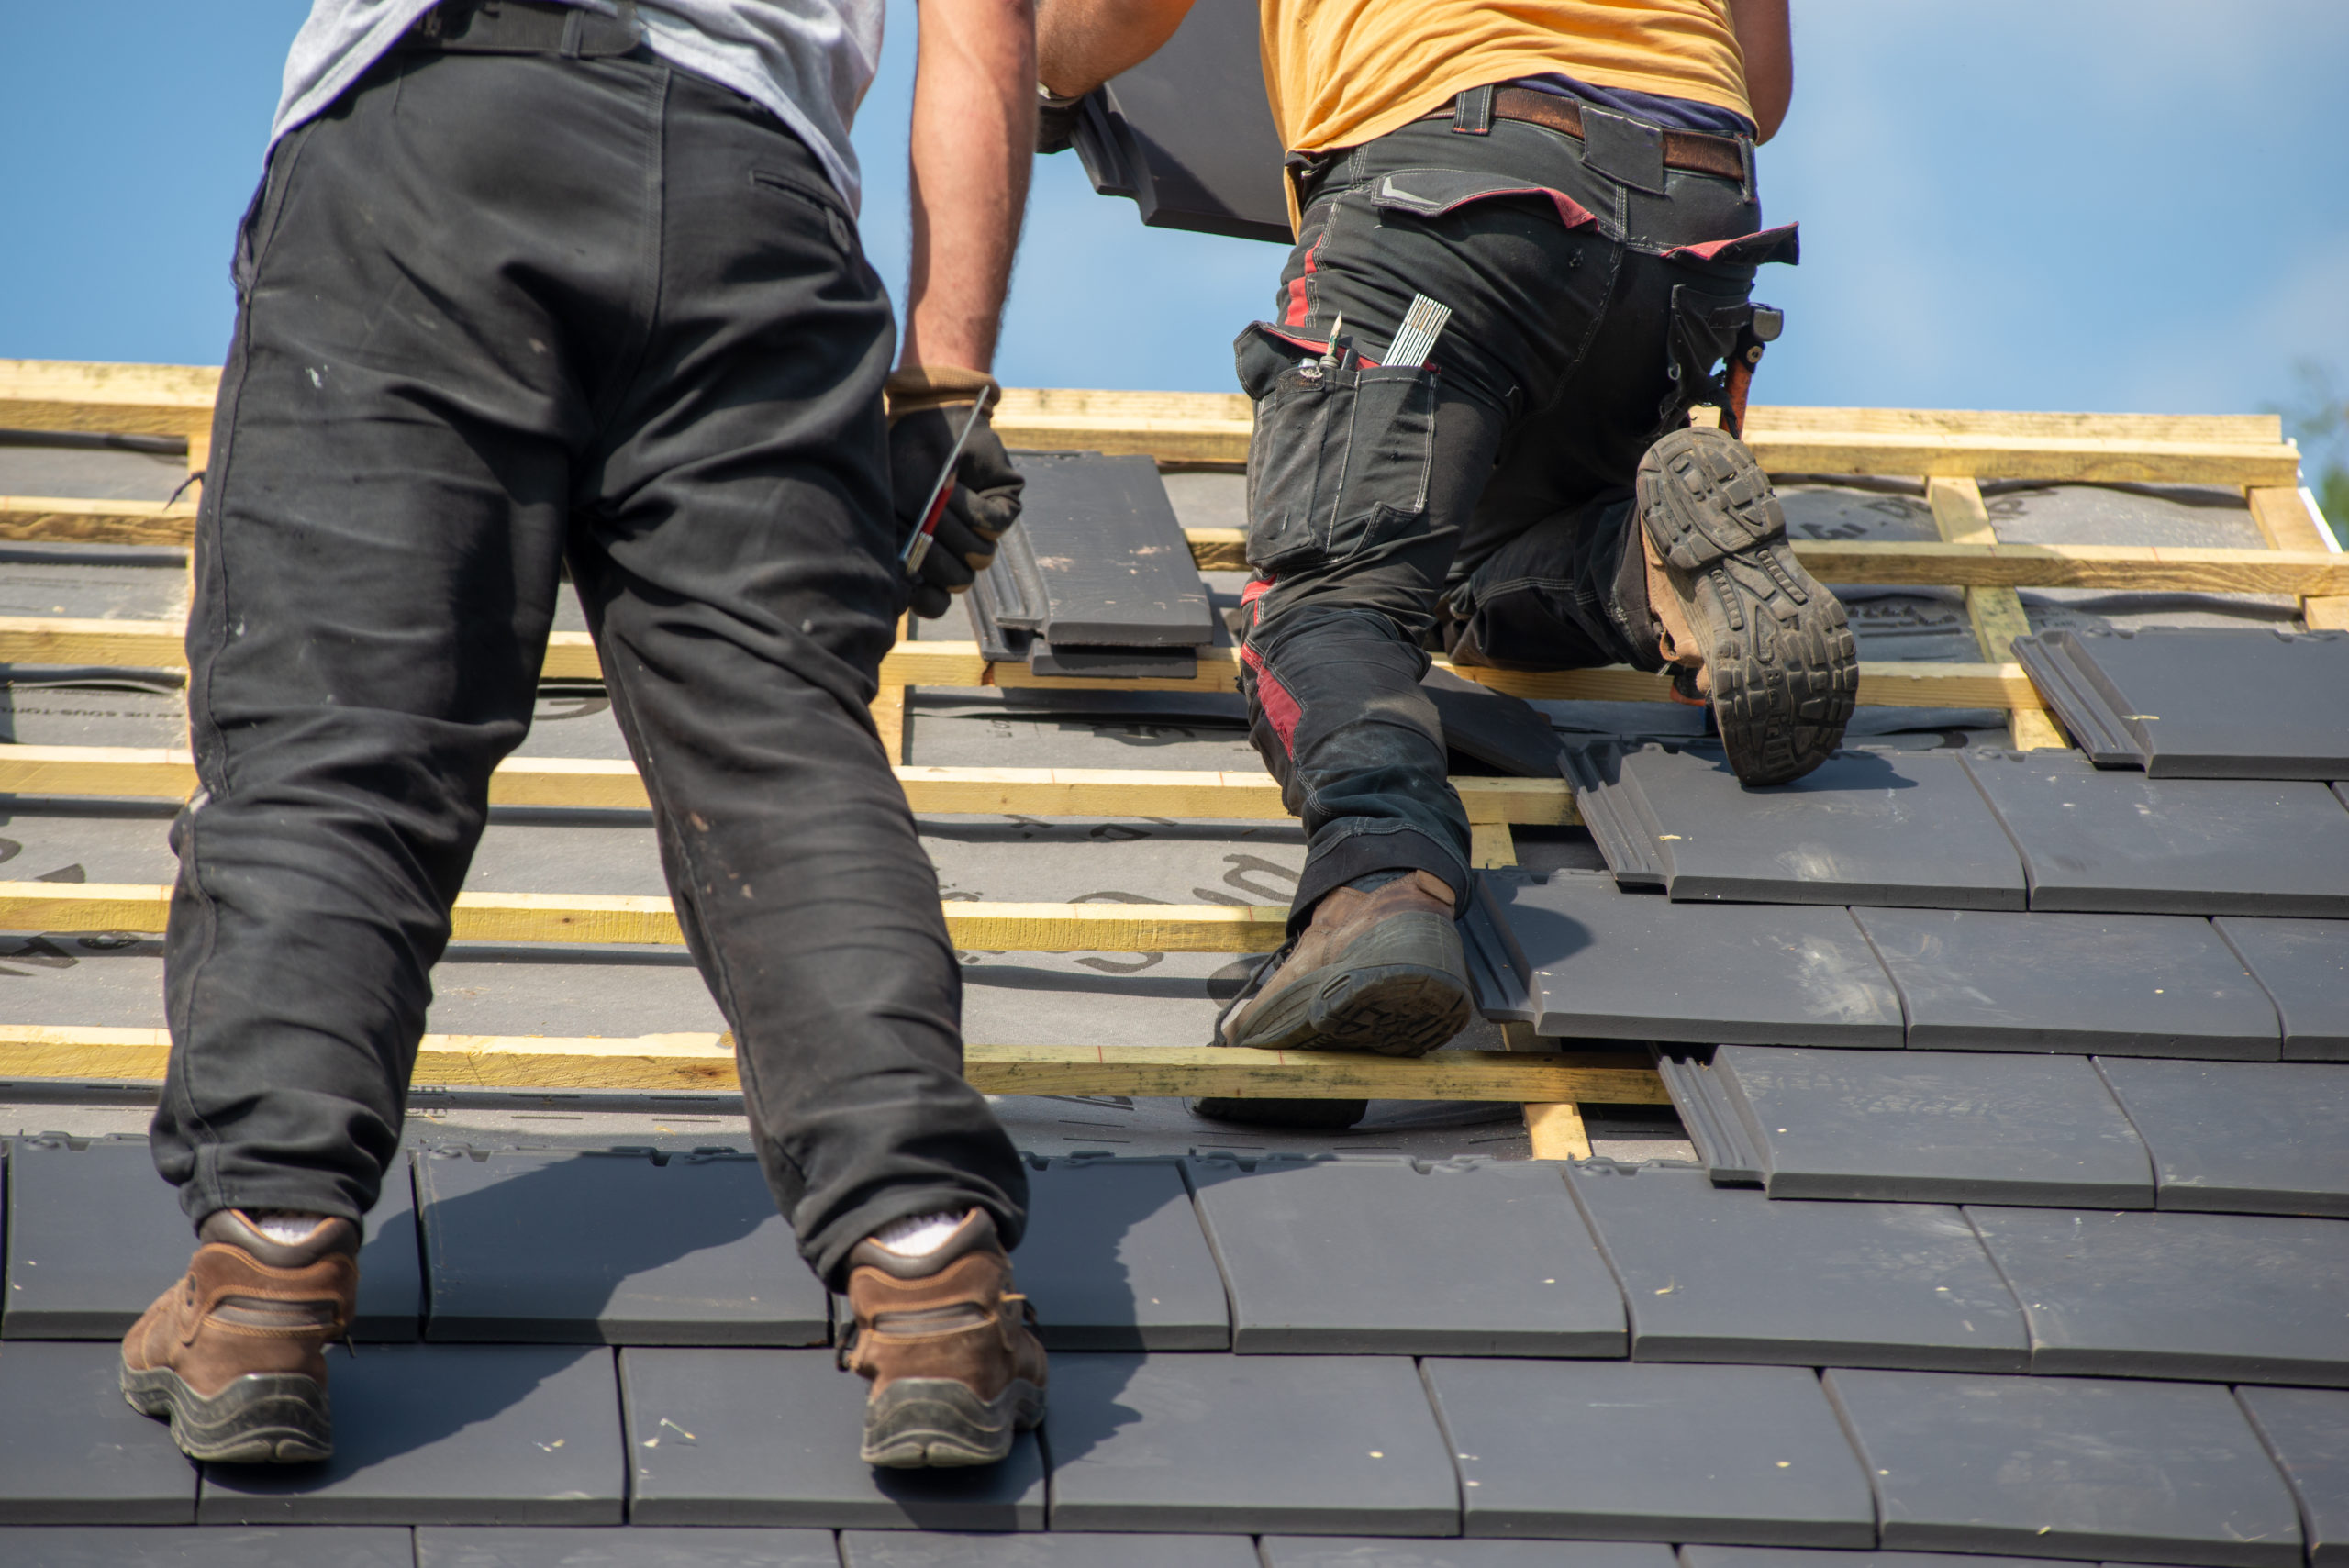 Roofers and builders reminded to follow duty of care (GOV.UK)